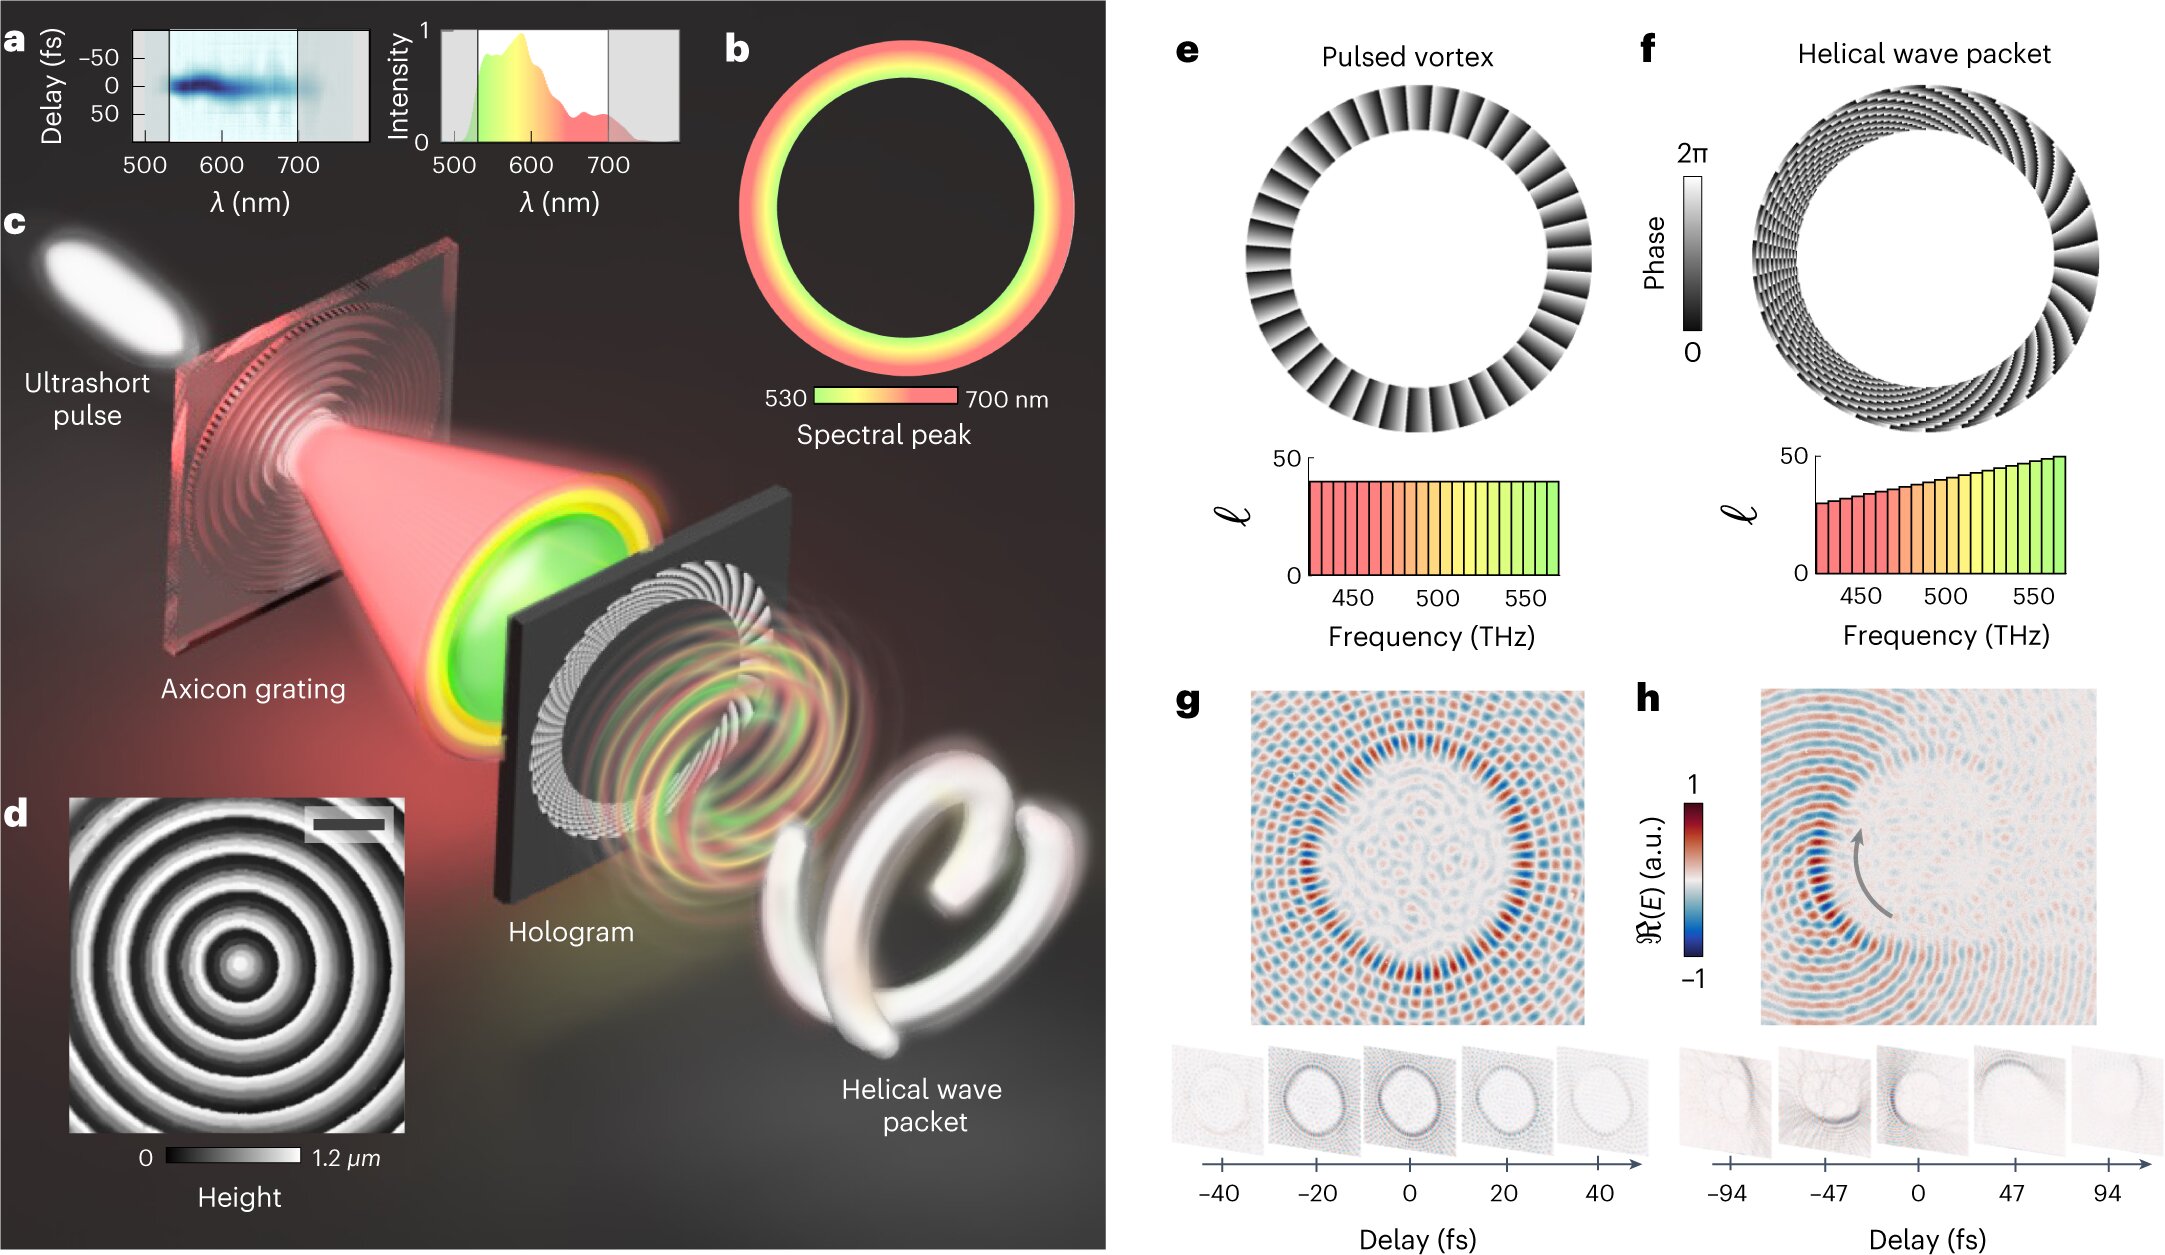 Photonics gets a fun twist with ultrashort light pulses modeled after a spring toy.